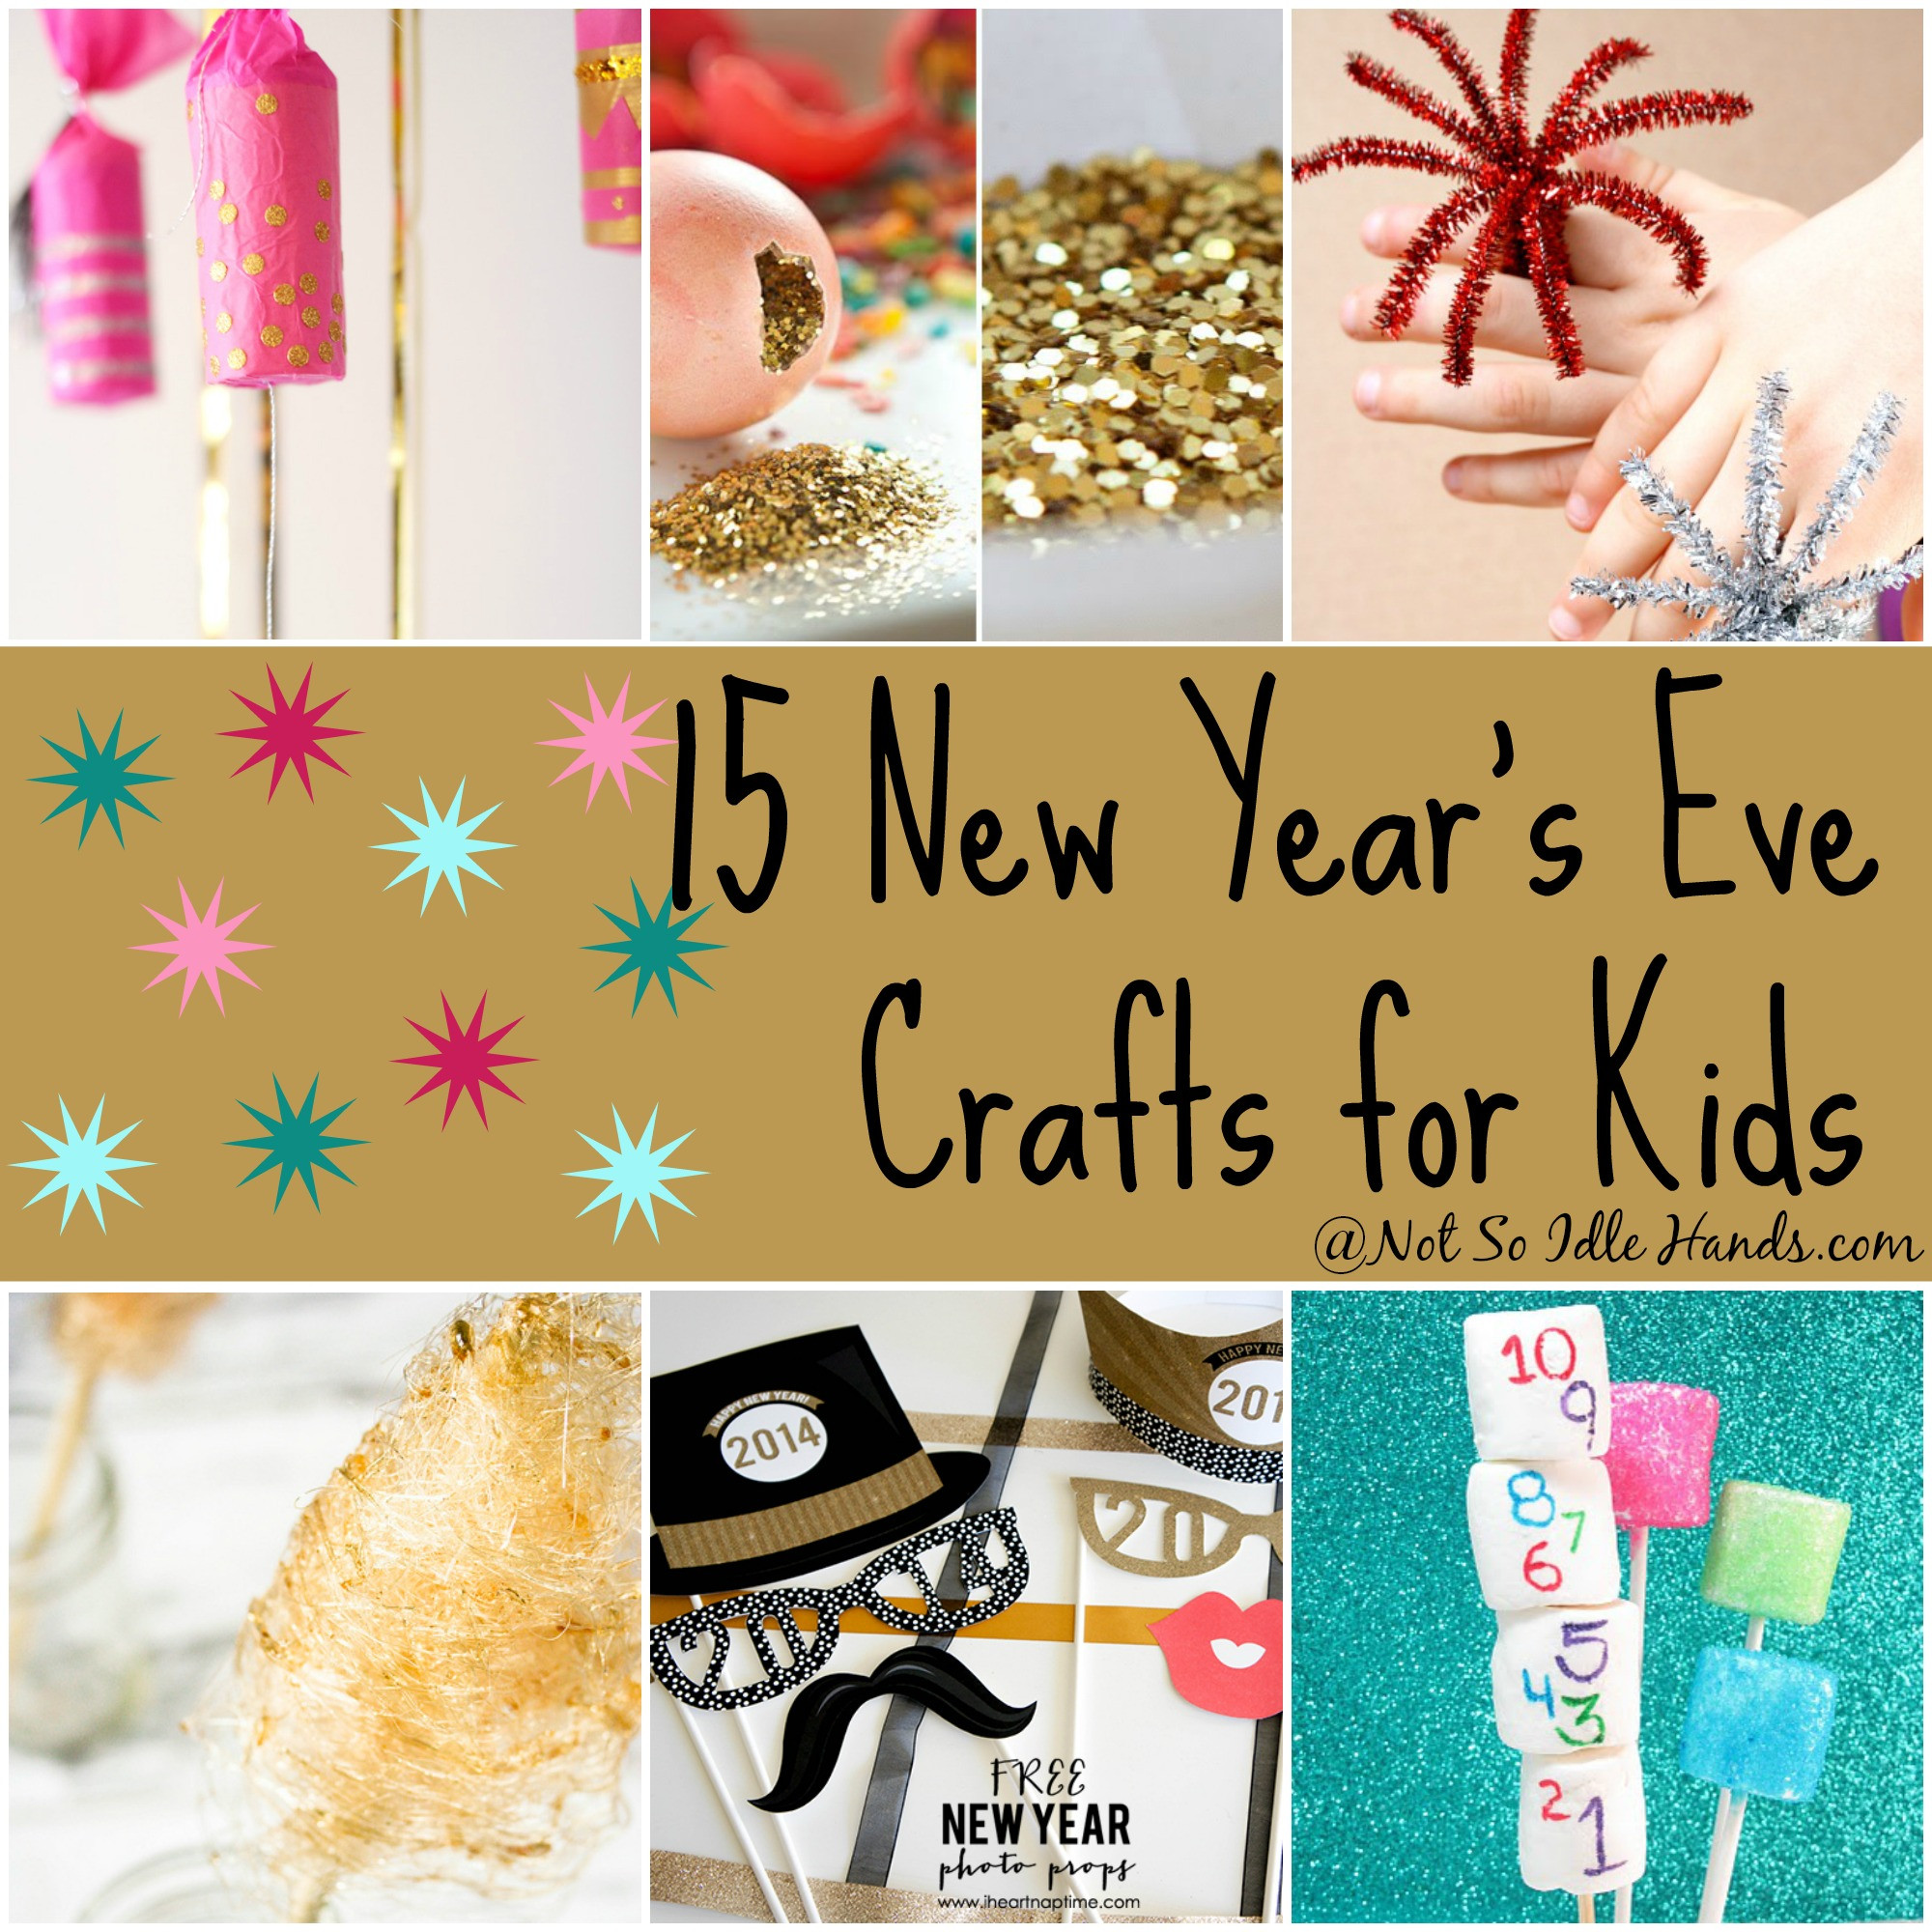 New Year Crafts Ideas
 19 Fun Ideas For Celebrating New Year’s Eve With Kids